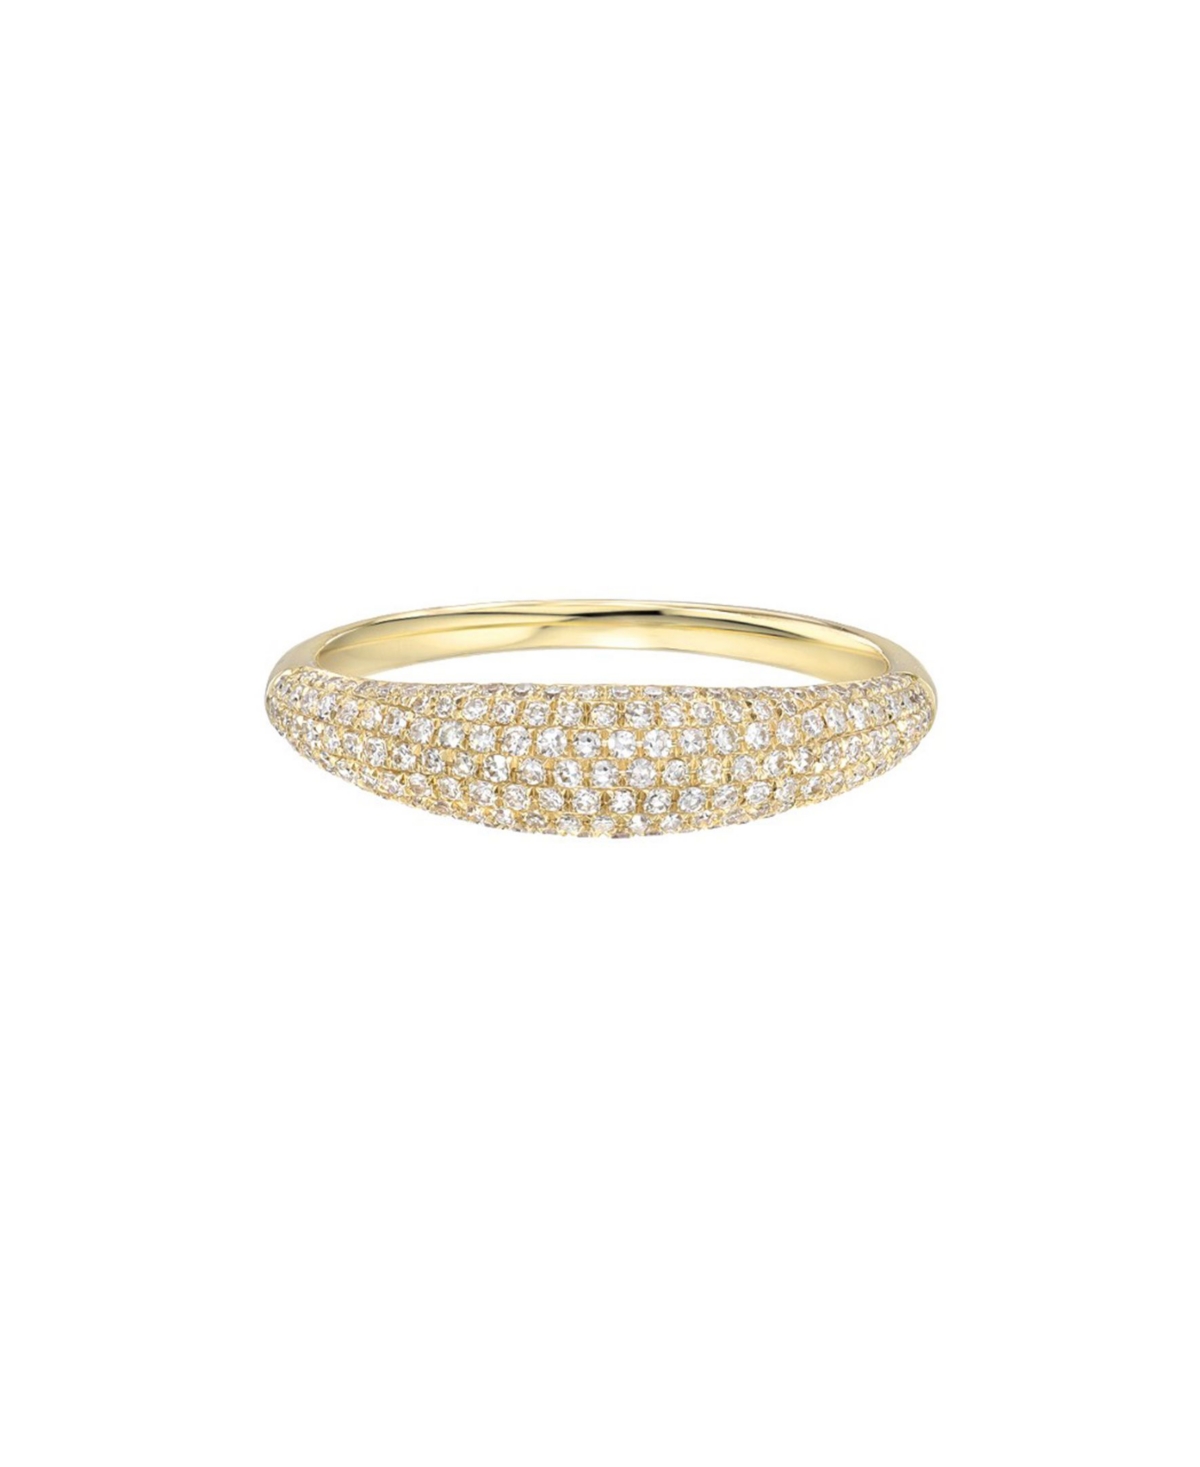 Diamond Pave Dome Ring - Gold